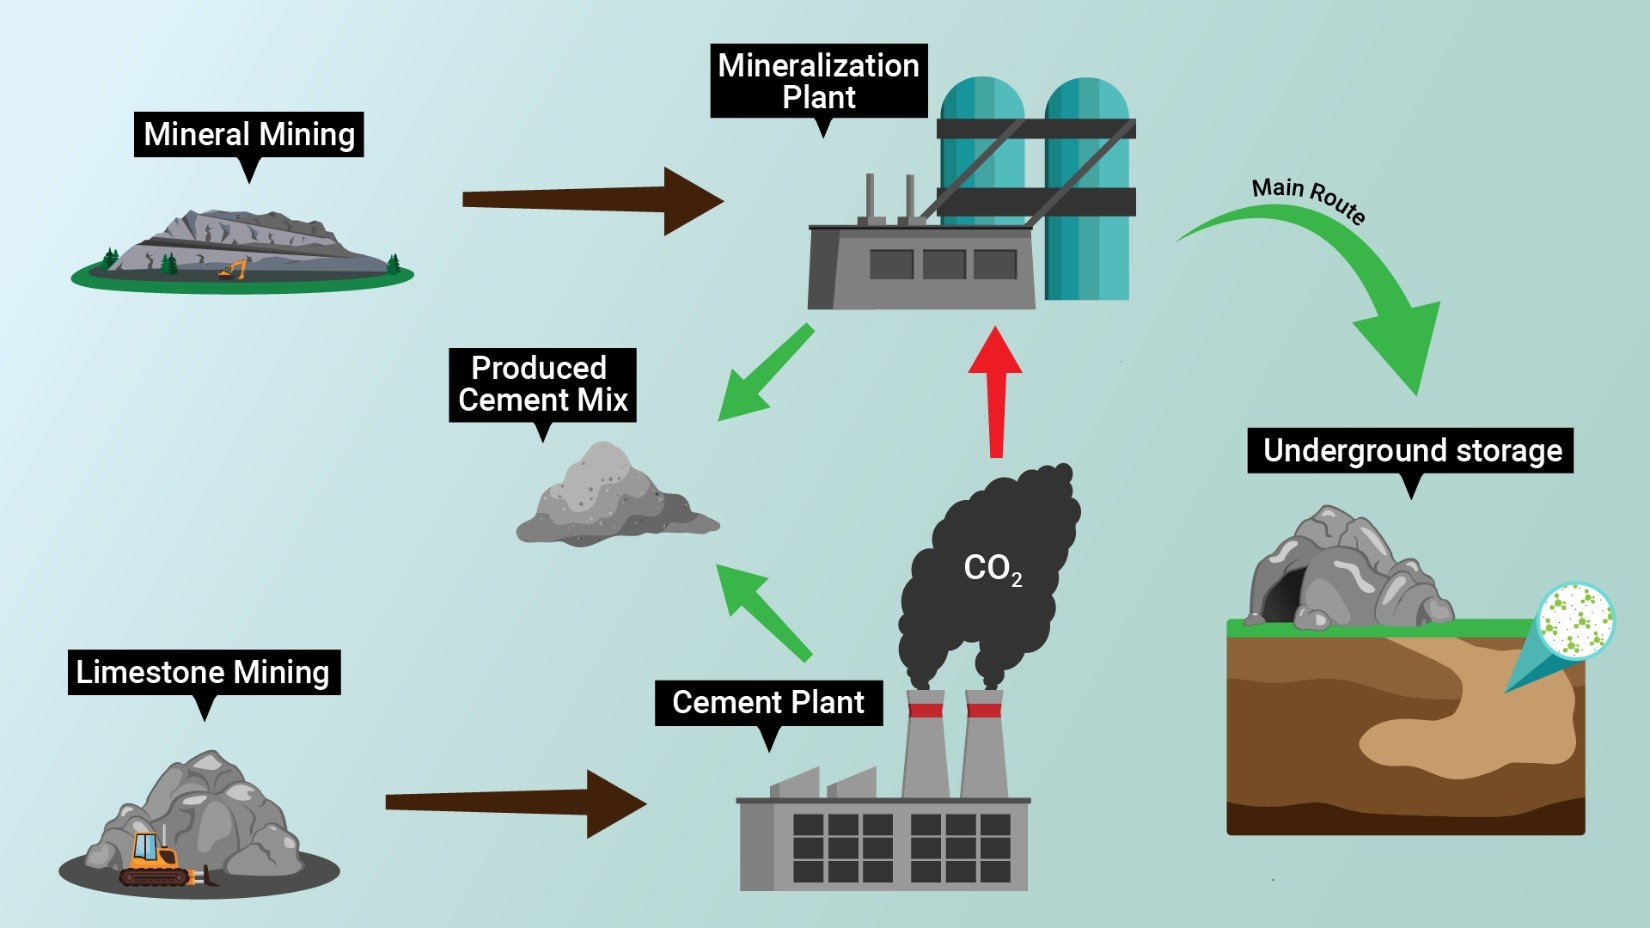 Carbon mineralization presents a new approach to carbon management in which captured CO2 is reacted with metal cations to form carbonate minerals.